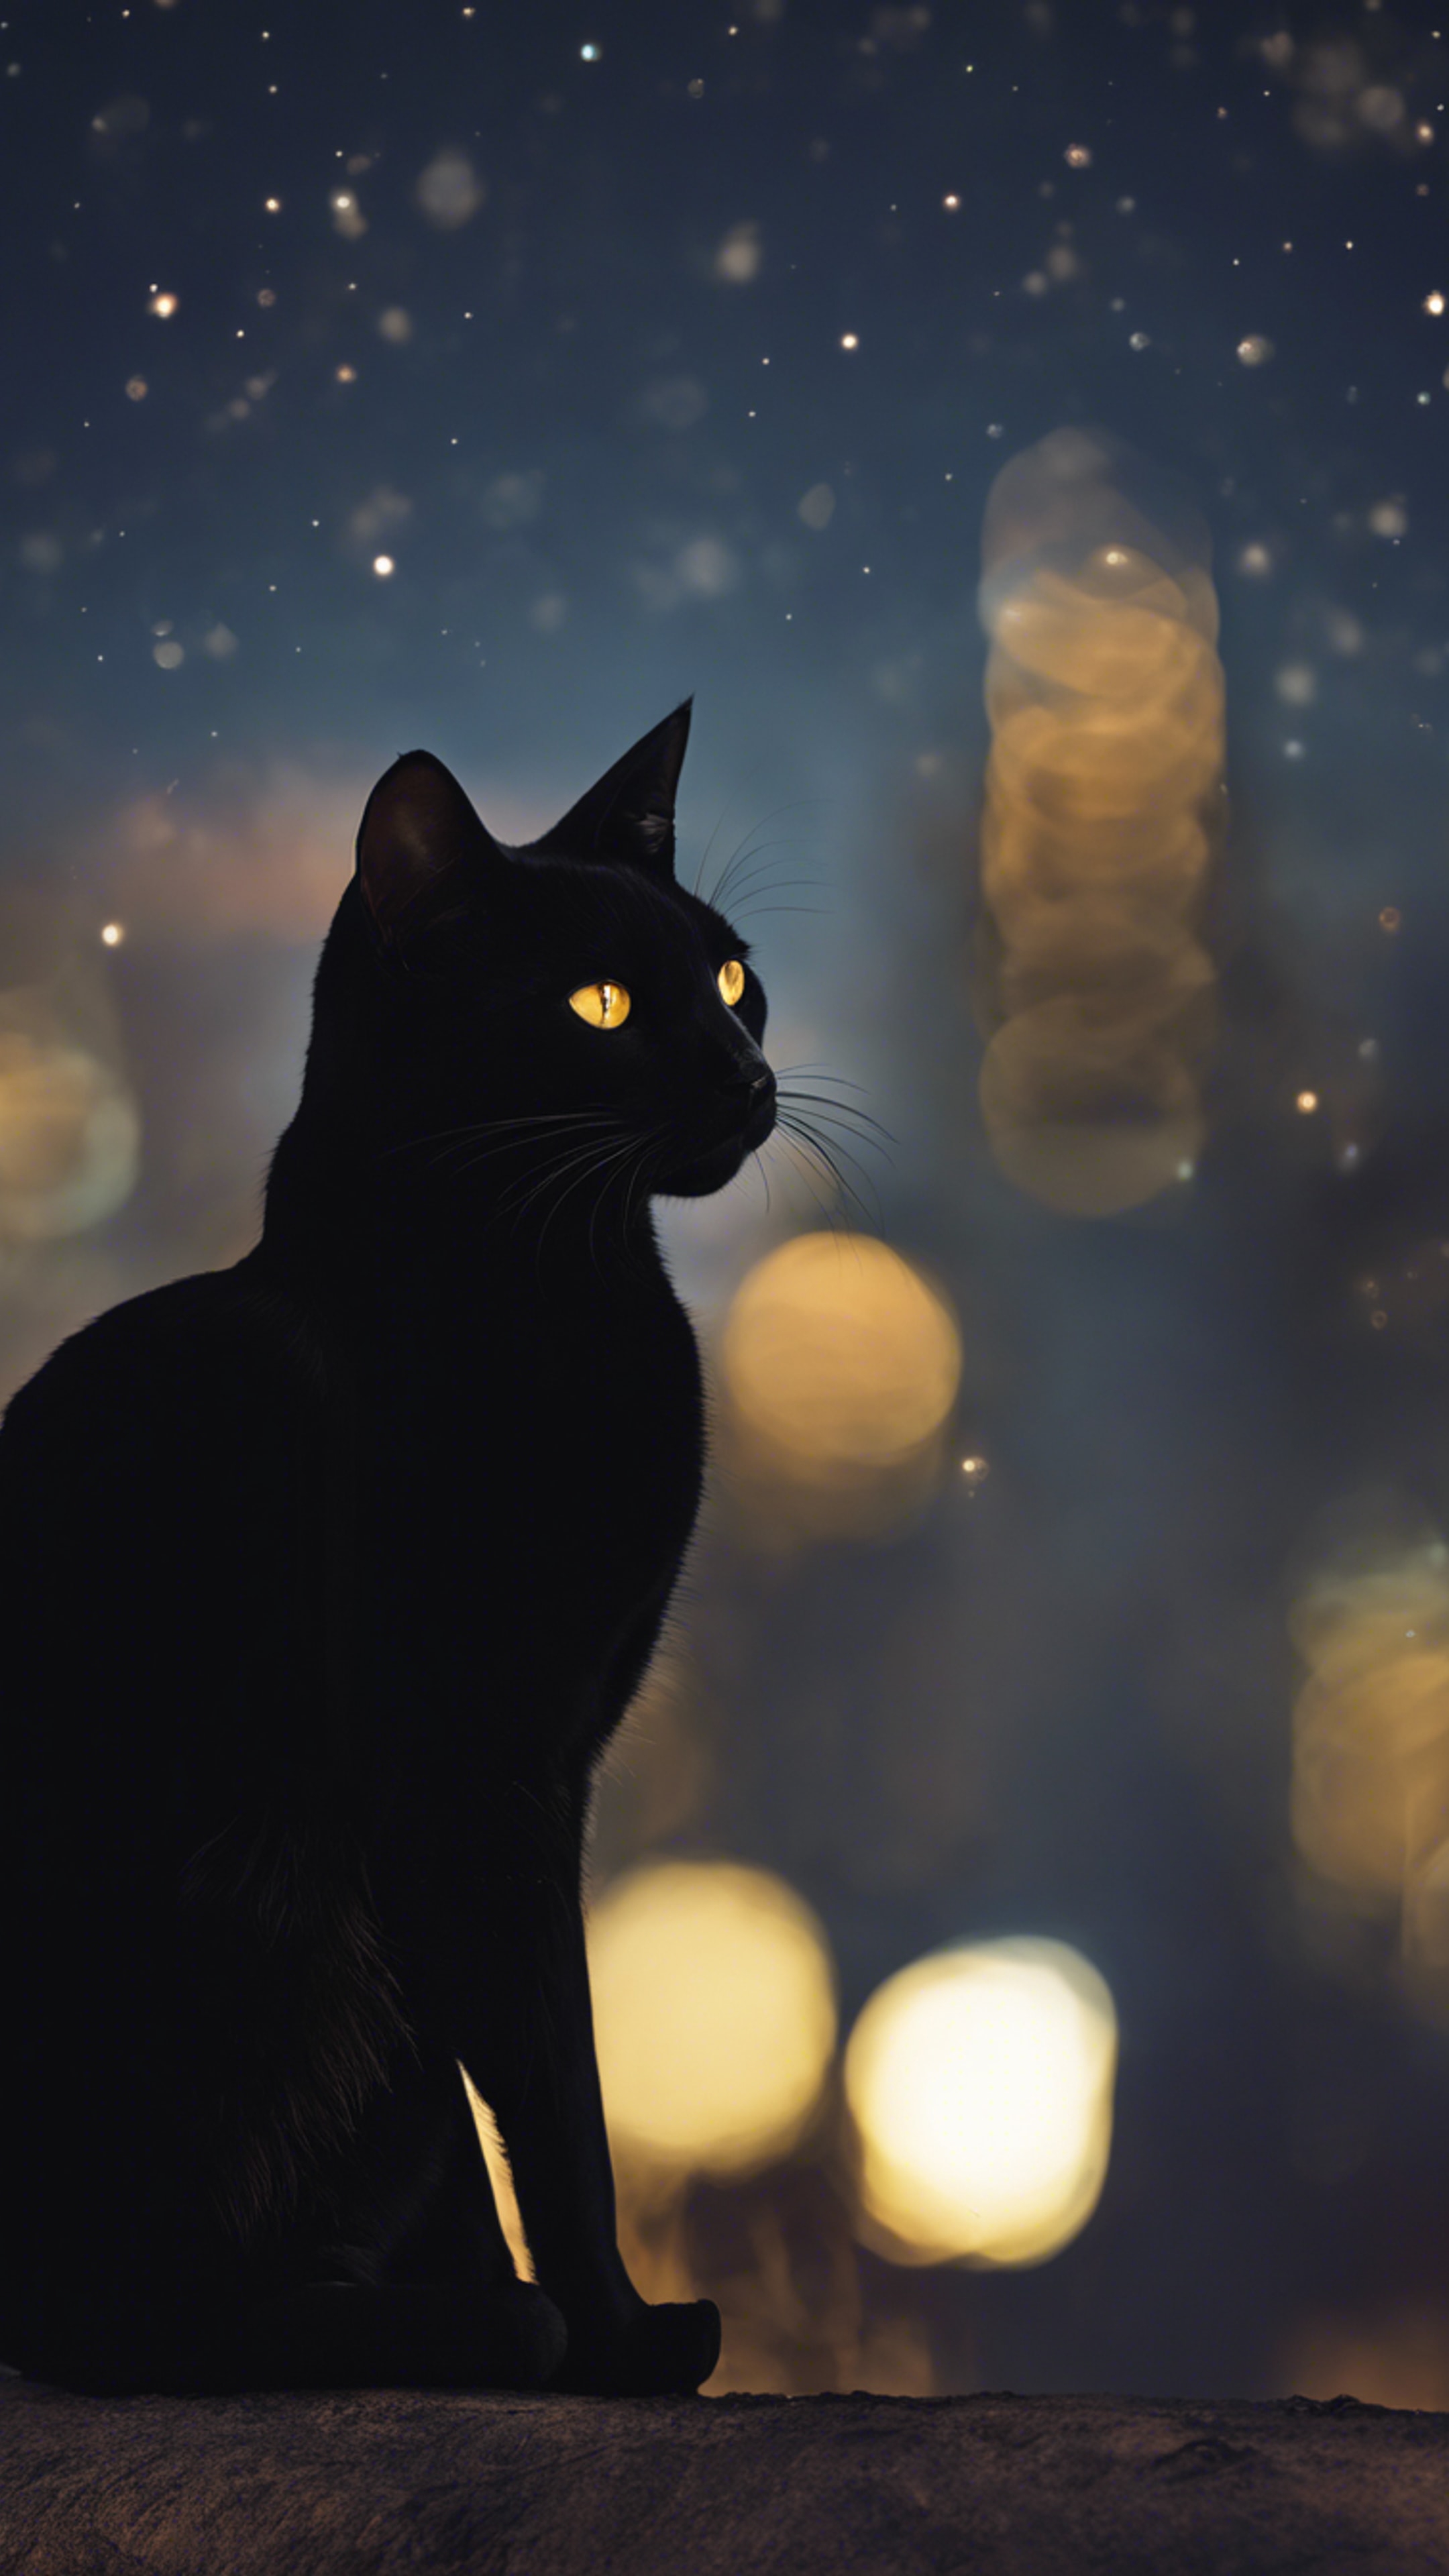 A Bombay cat blending into the night sky, only its faint silhouette and gleaming yellow eyes visible.壁紙[8e715ef55e7e4610816a]